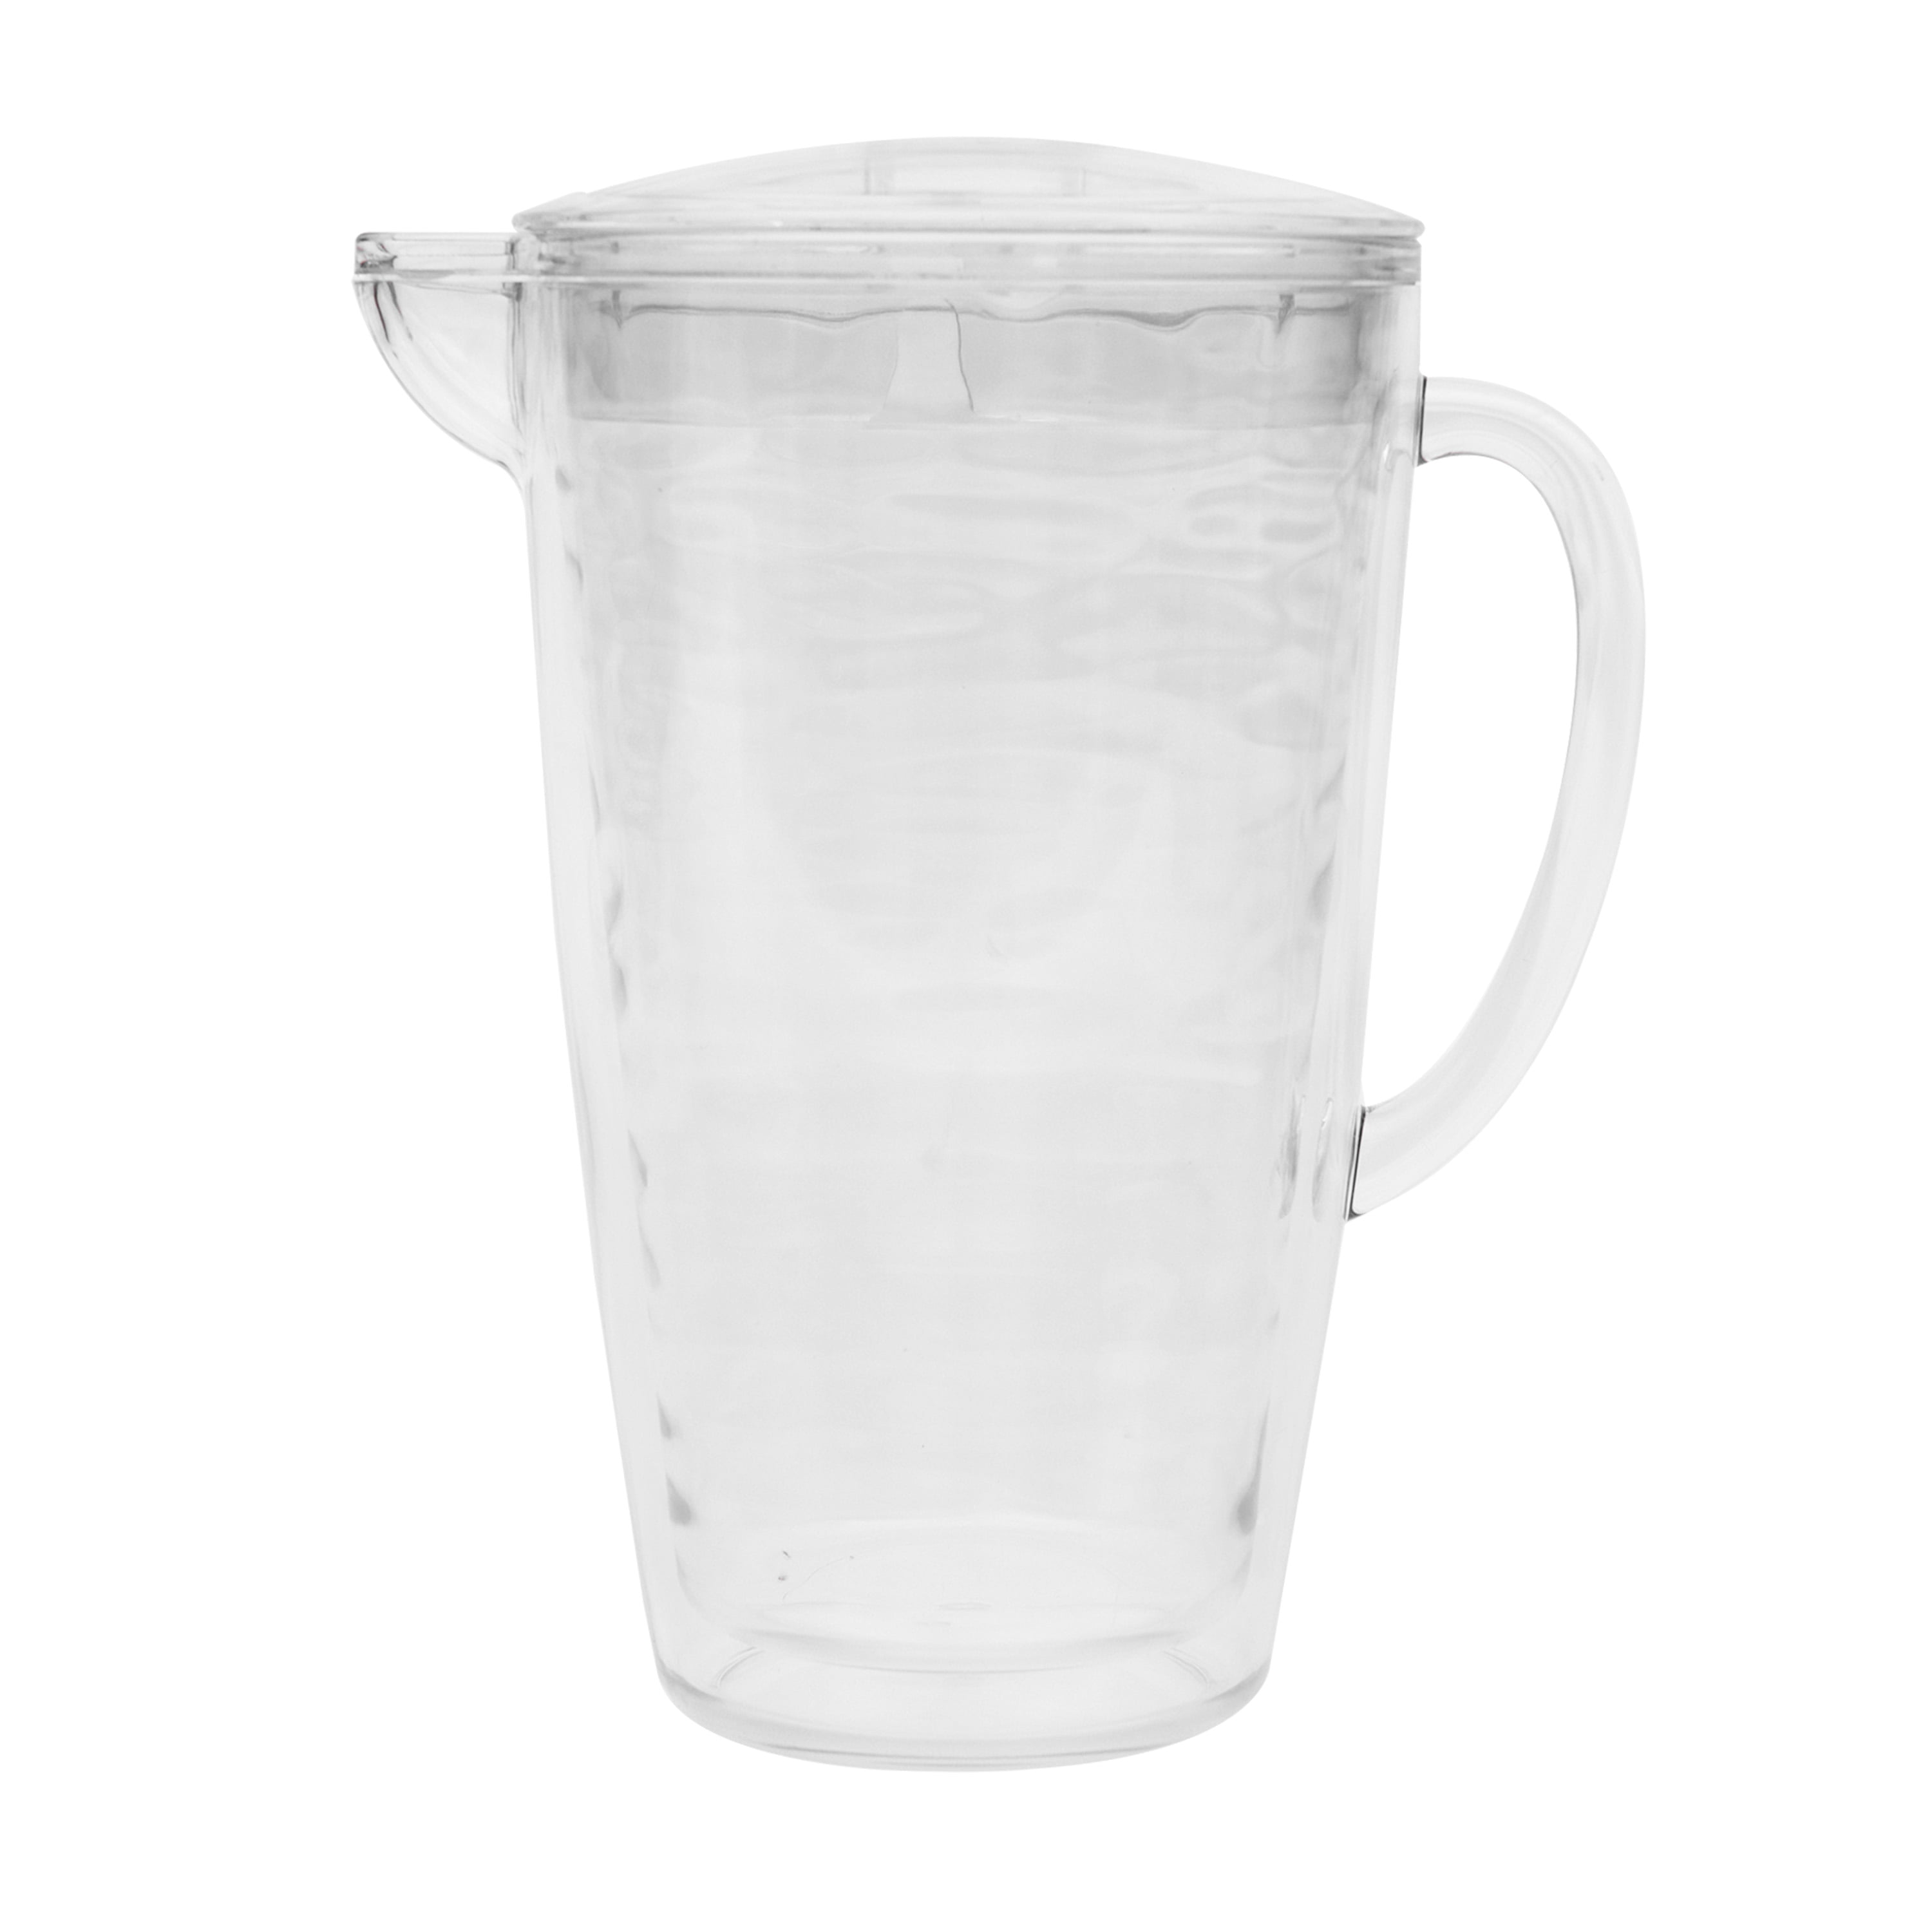 Mainstays 2-Quart Clear Pitcher with Turquoise Lid 